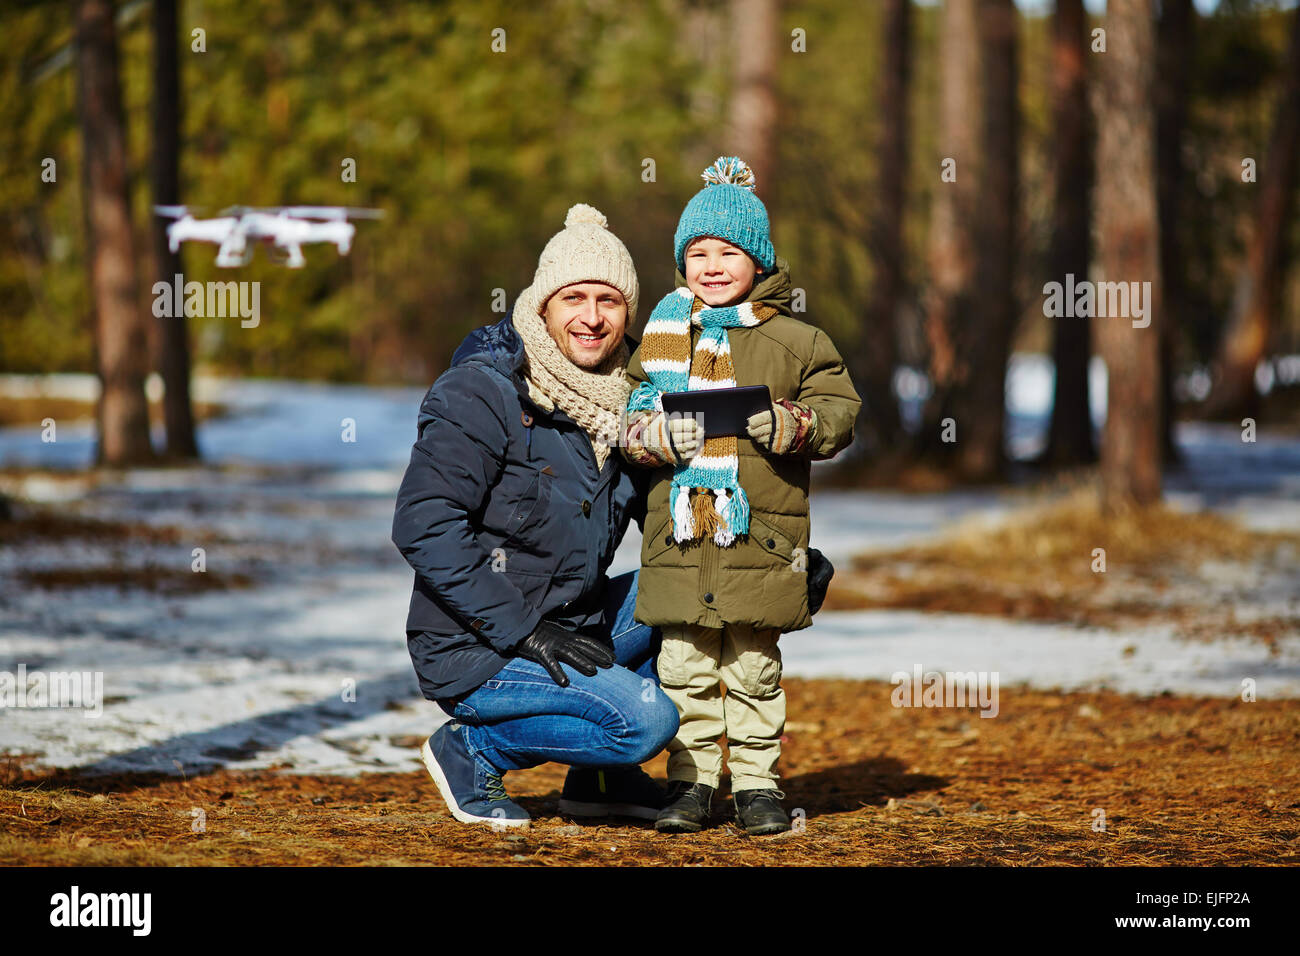 Father teaching son to play with RC toy Stock Photo